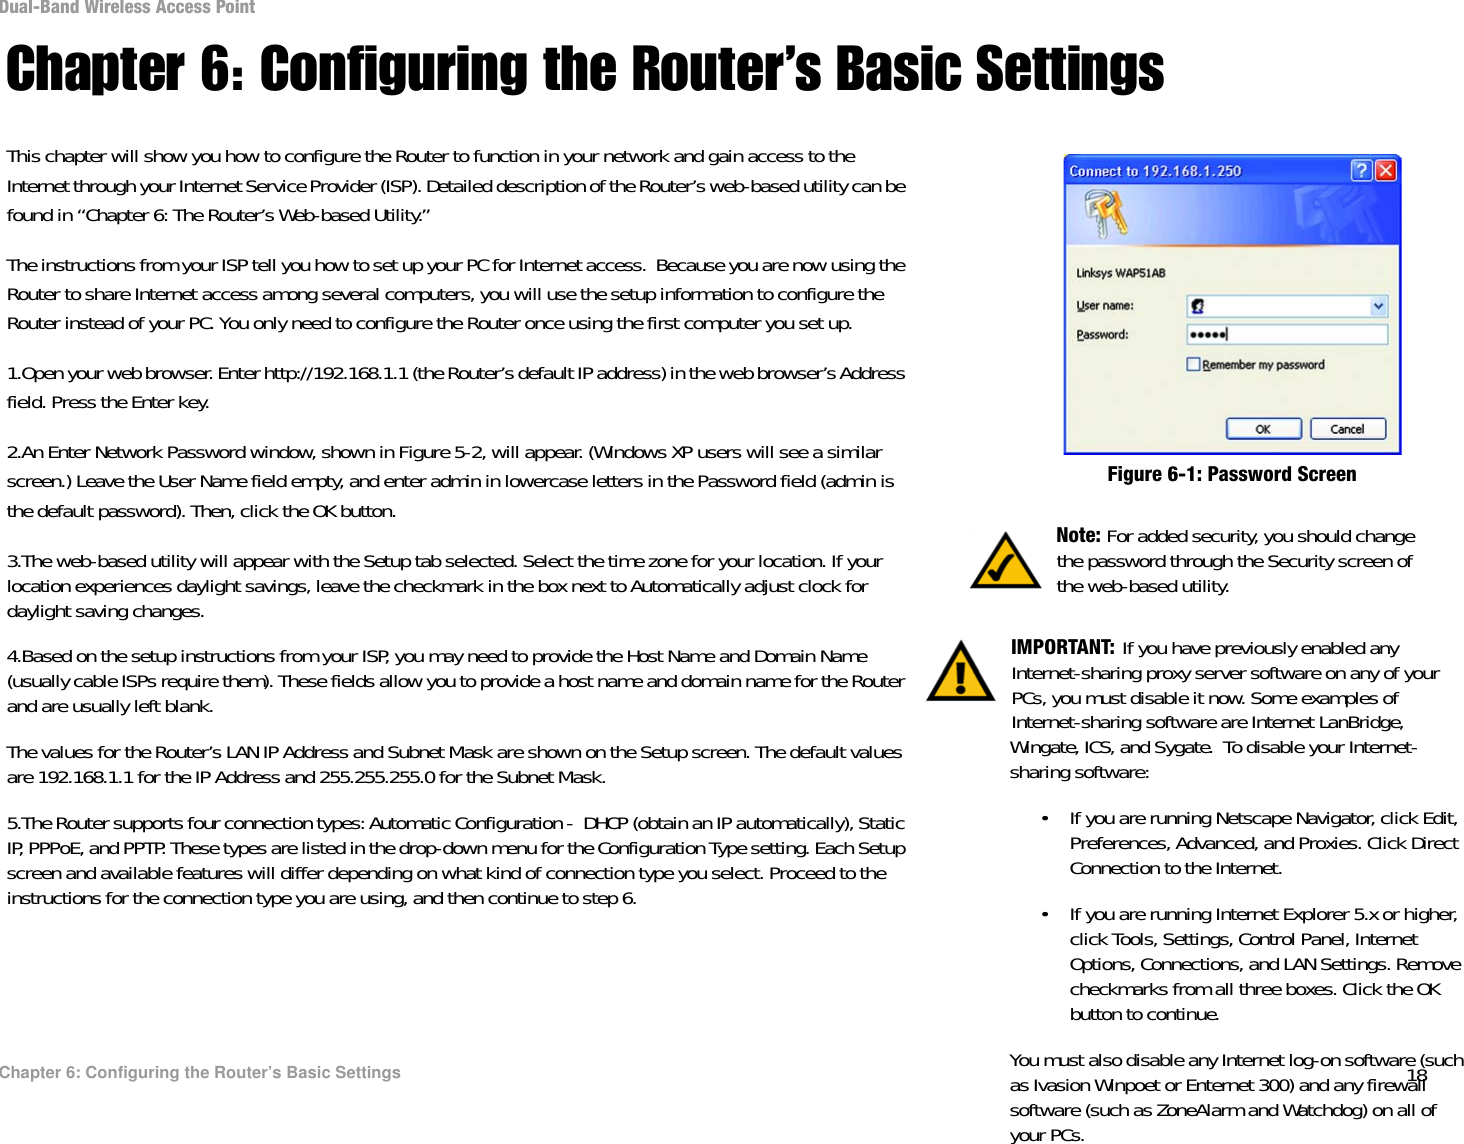 18Chapter 6: Configuring the Router’s Basic SettingsDual-Band Wireless Access PointChapter 6: Configuring the Router’s Basic SettingsThis chapter will show you how to configure the Router to function in your network and gain access to the Internet through your Internet Service Provider (ISP). Detailed description of the Router’s web-based utility can be found in “Chapter 6: The Router’s Web-based Utility.” The instructions from your ISP tell you how to set up your PC for Internet access.  Because you are now using the Router to share Internet access among several computers, you will use the setup information to configure the Router instead of your PC. You only need to configure the Router once using the first computer you set up.1.Open your web browser. Enter http://192.168.1.1 (the Router’s default IP address) in the web browser’s Address field. Press the Enter key.2.An Enter Network Password window, shown in Figure 5-2, will appear. (Windows XP users will see a similar screen.) Leave the User Name field empty, and enter admin in lowercase letters in the Password field (admin is the default password). Then, click the OK button. 3.The web-based utility will appear with the Setup tab selected. Select the time zone for your location. If your location experiences daylight savings, leave the checkmark in the box next to Automatically adjust clock for daylight saving changes. 4.Based on the setup instructions from your ISP, you may need to provide the Host Name and Domain Name (usually cable ISPs require them). These fields allow you to provide a host name and domain name for the Router and are usually left blank.The values for the Router’s LAN IP Address and Subnet Mask are shown on the Setup screen. The default values are 192.168.1.1 for the IP Address and 255.255.255.0 for the Subnet Mask.5.The Router supports four connection types: Automatic Configuration -  DHCP (obtain an IP automatically), Static IP, PPPoE, and PPTP. These types are listed in the drop-down menu for the Configuration Type setting. Each Setup screen and available features will differ depending on what kind of connection type you select. Proceed to the instructions for the connection type you are using, and then continue to step 6. Note: For added security, you should change the password through the Security screen of the web-based utility.Figure 6-1: Password ScreenIMPORTANT: If you have previously enabled any Internet-sharing proxy server software on any of your PCs, you must disable it now. Some examples of Internet-sharing software are Internet LanBridge, Wingate, ICS, and Sygate.  To disable your Internet-sharing software: • If you are running Netscape Navigator, click Edit, Preferences, Advanced, and Proxies. Click Direct Connection to the Internet.• If you are running Internet Explorer 5.x or higher, click Tools, Settings, Control Panel, Internet Options, Connections, and LAN Settings. Remove checkmarks from all three boxes. Click the OK button to continue. You must also disable any Internet log-on software (such as Ivasion Winpoet or Enternet 300) and any firewall software (such as ZoneAlarm and Watchdog) on all of your PCs.